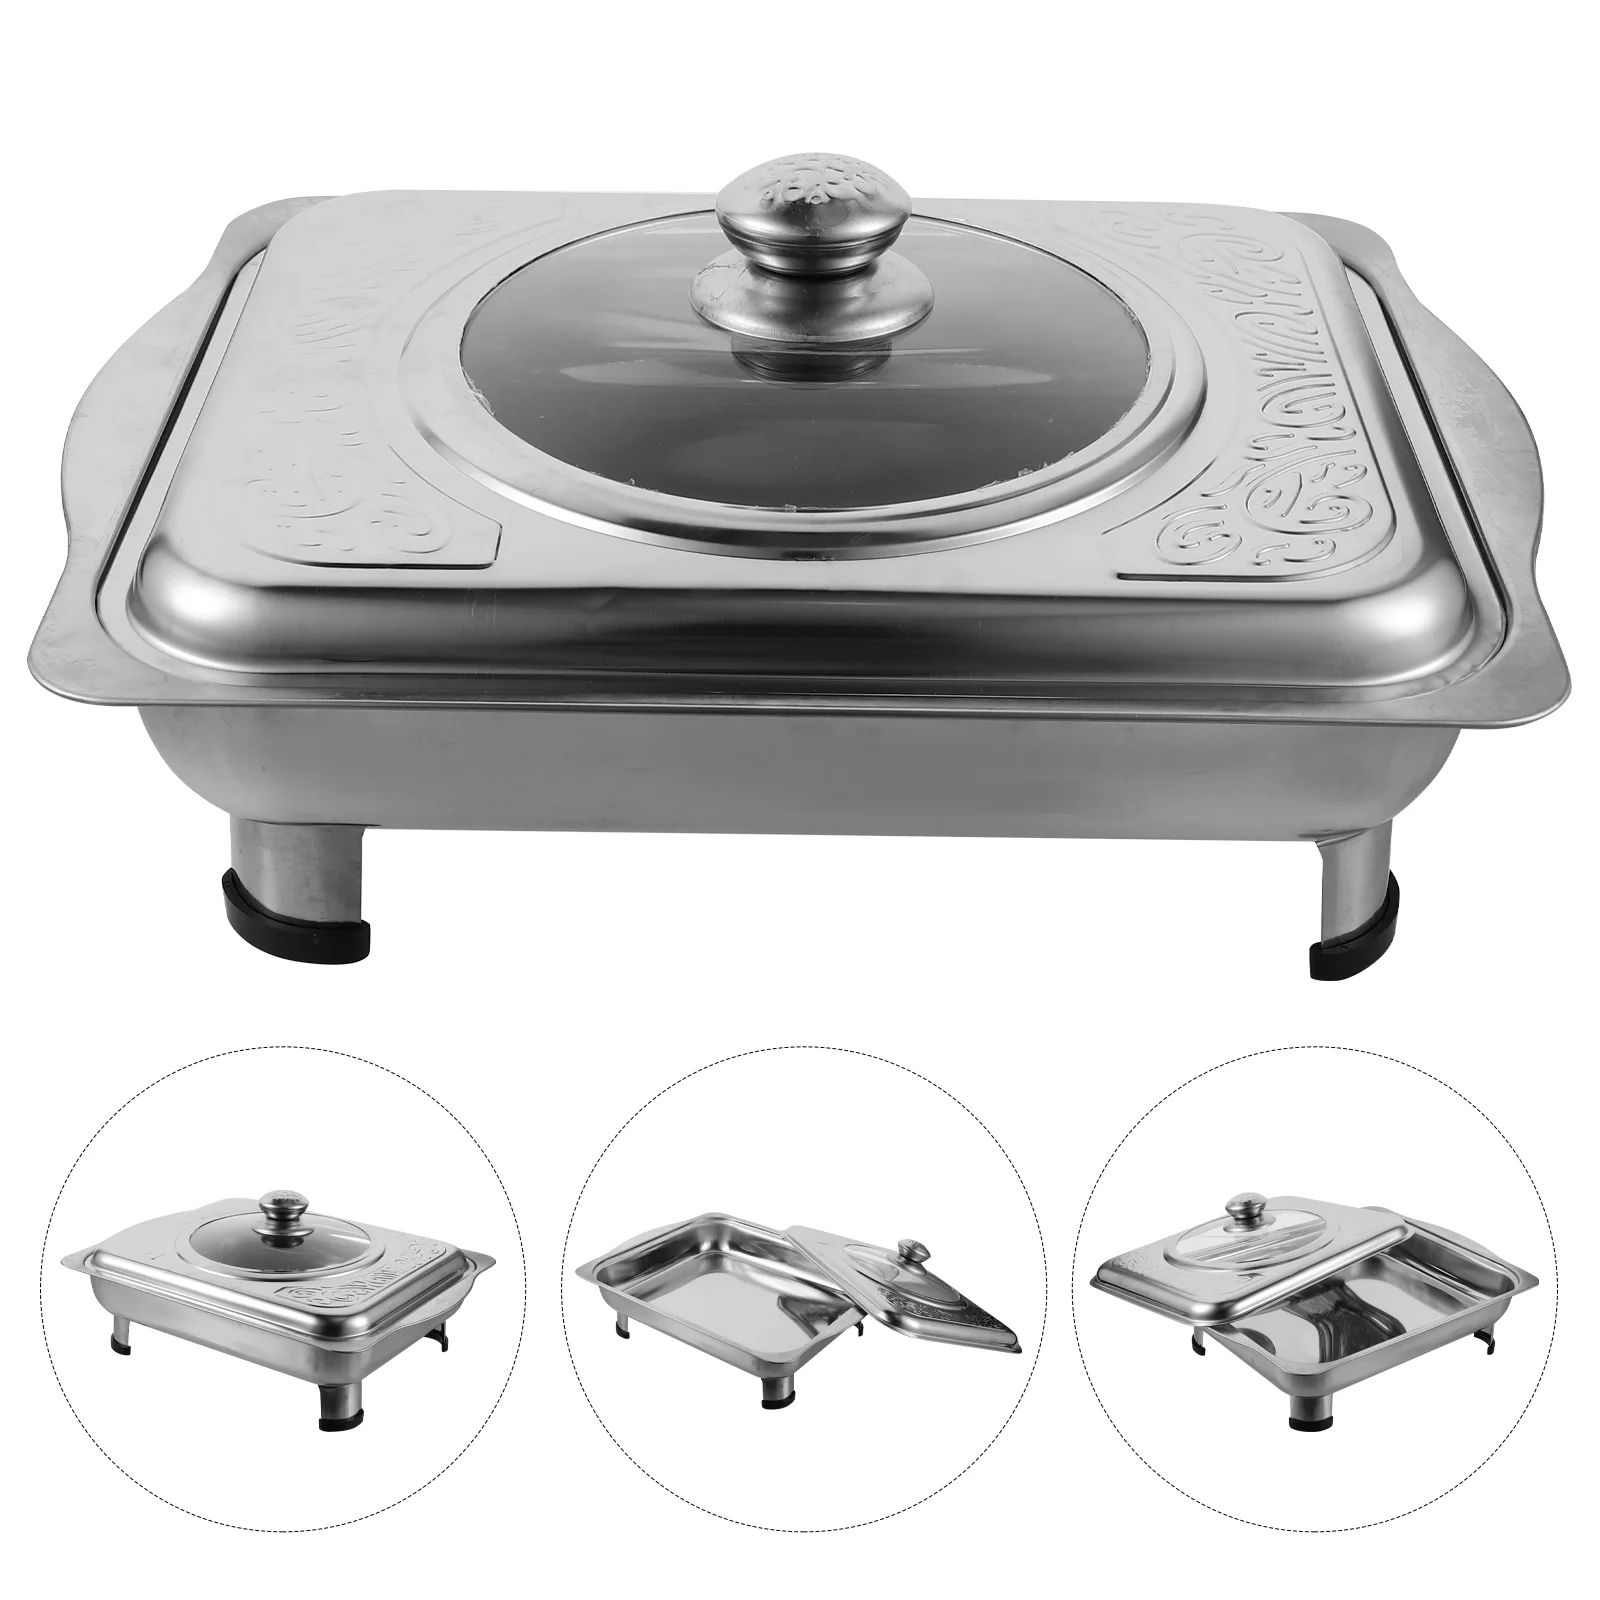 

Stove Buffet Party Metal Tray Server Dish Stainless Steel Dishes Holder Steam Table Pan Simple Foods Cover Serving